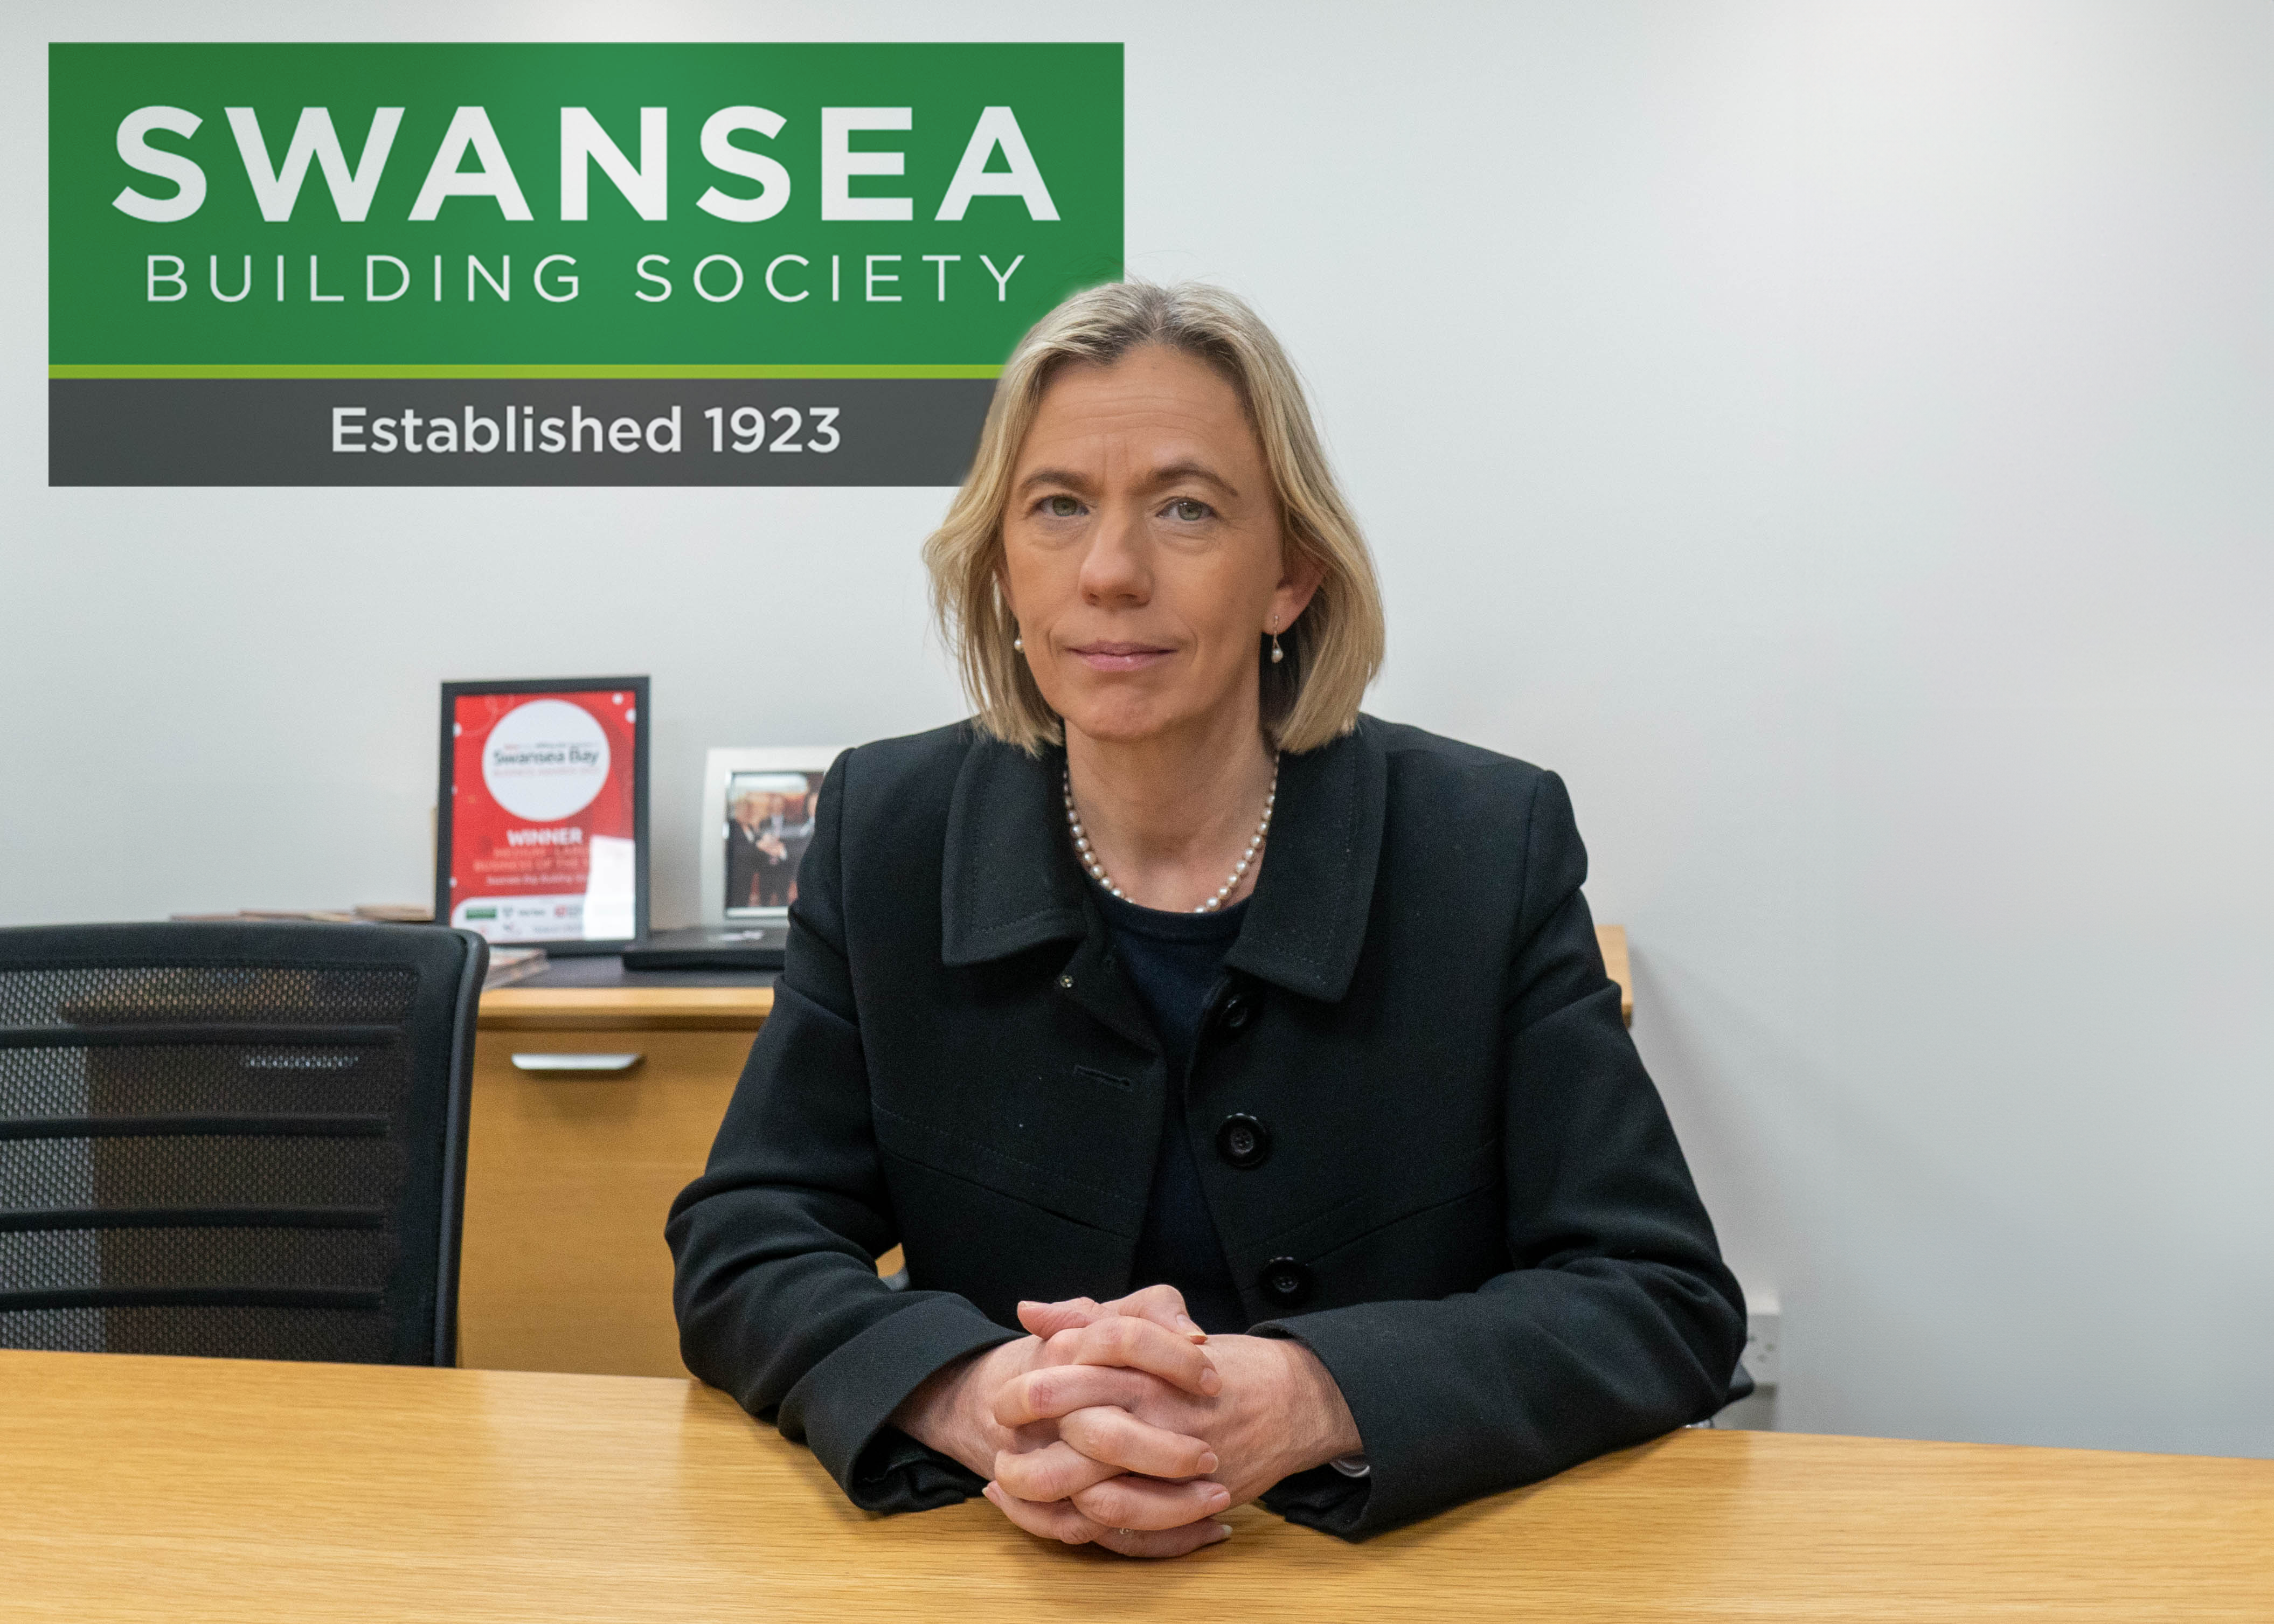 Swansea Building Society appoints distinguished new Non-Executive Director